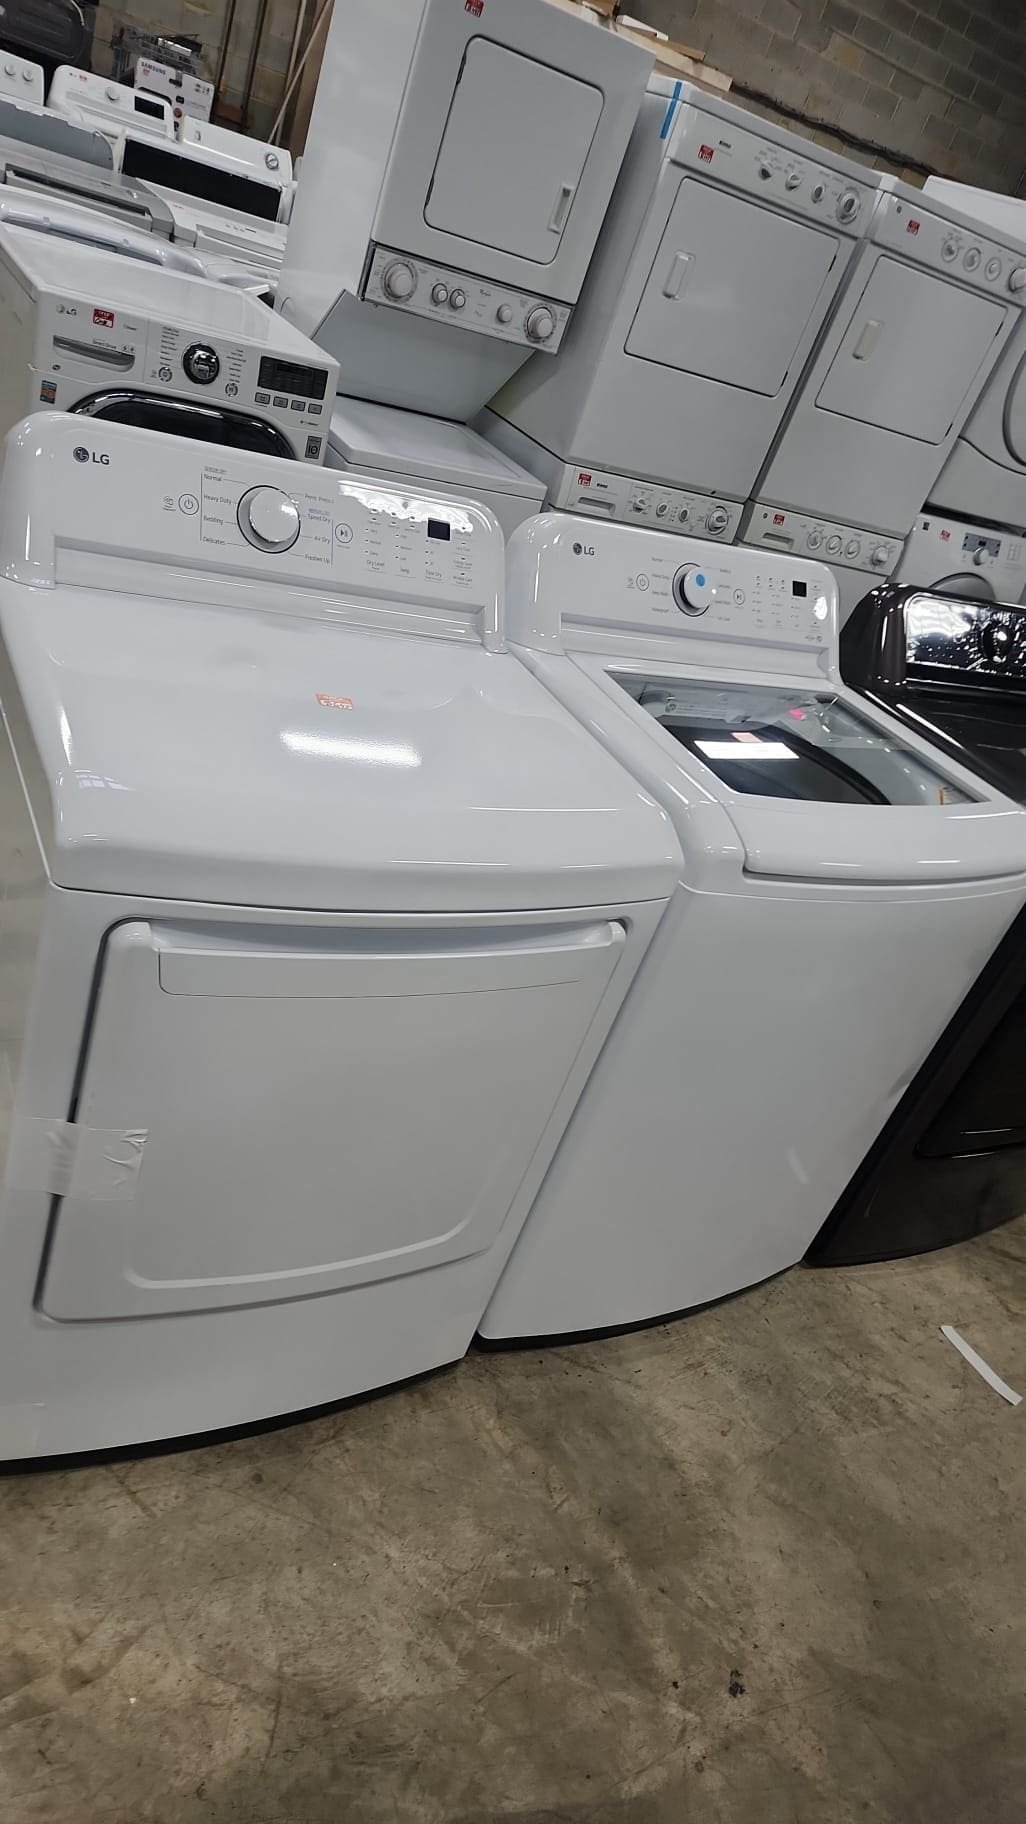 LG – 4.3 Cu. Ft. Top Load Washer With 7.3 Cu. Ft. Electric Dryer